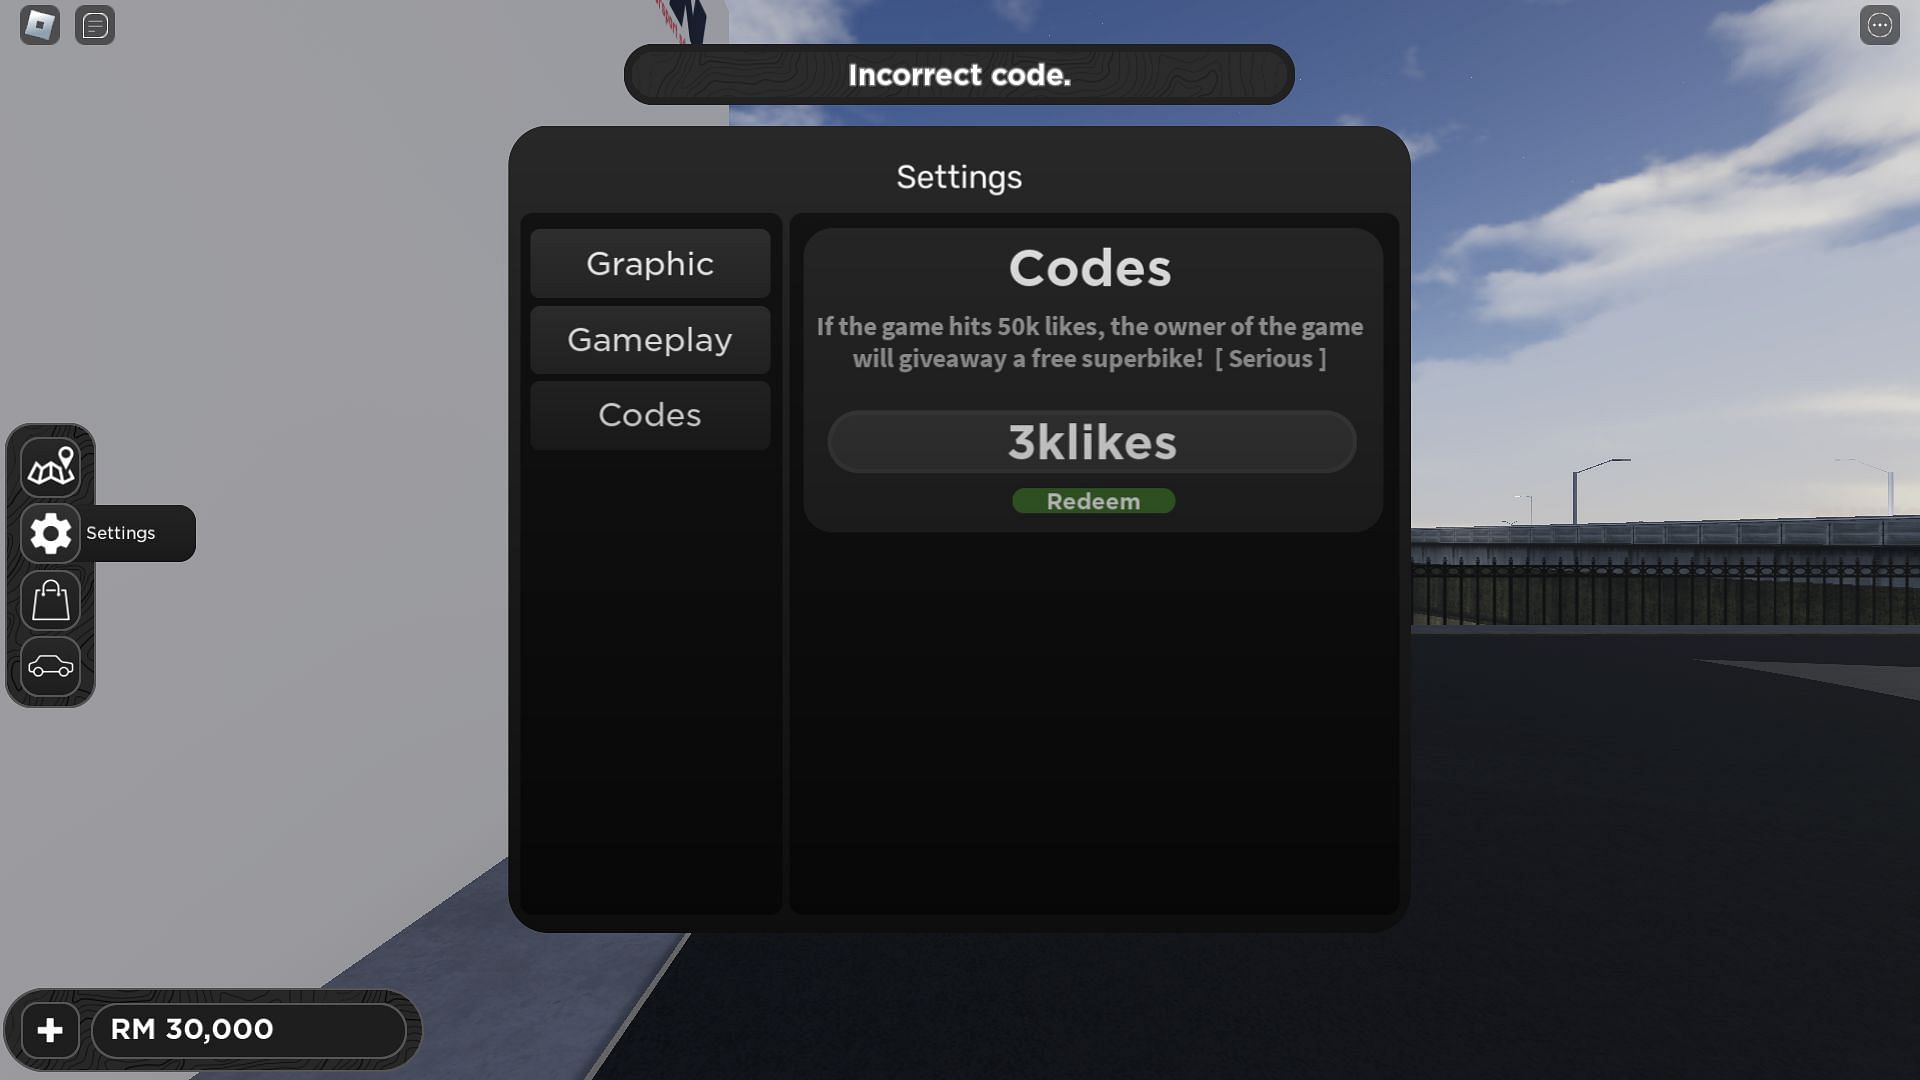 Troubleshooting codes for The Ride (Image via Roblox)